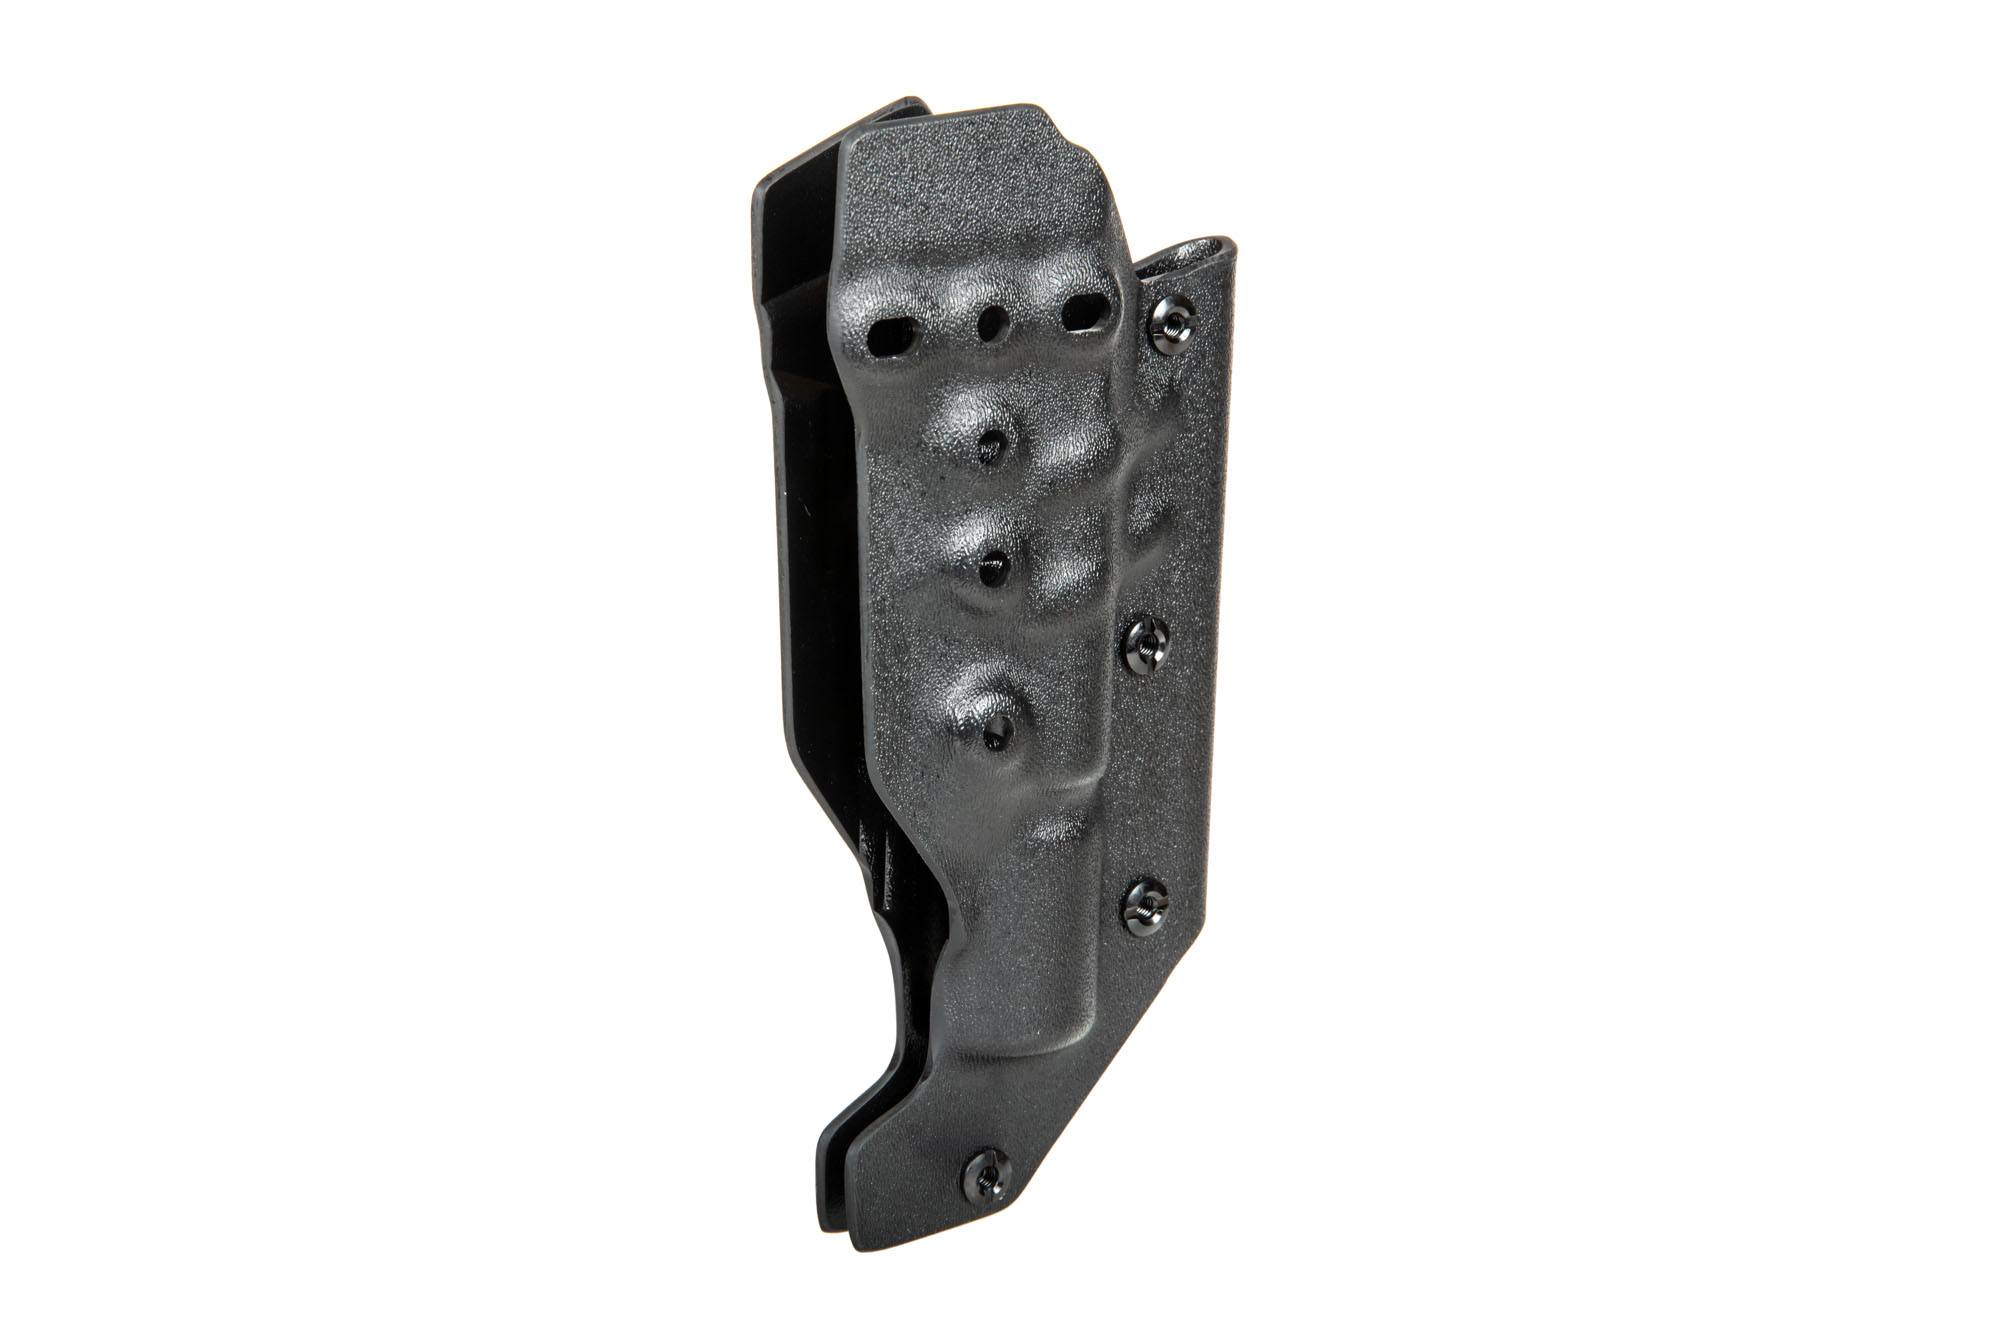 Kydex Holster for GBB Replicas with X300 Flashlight and Silencer (TYPE 2) - Black